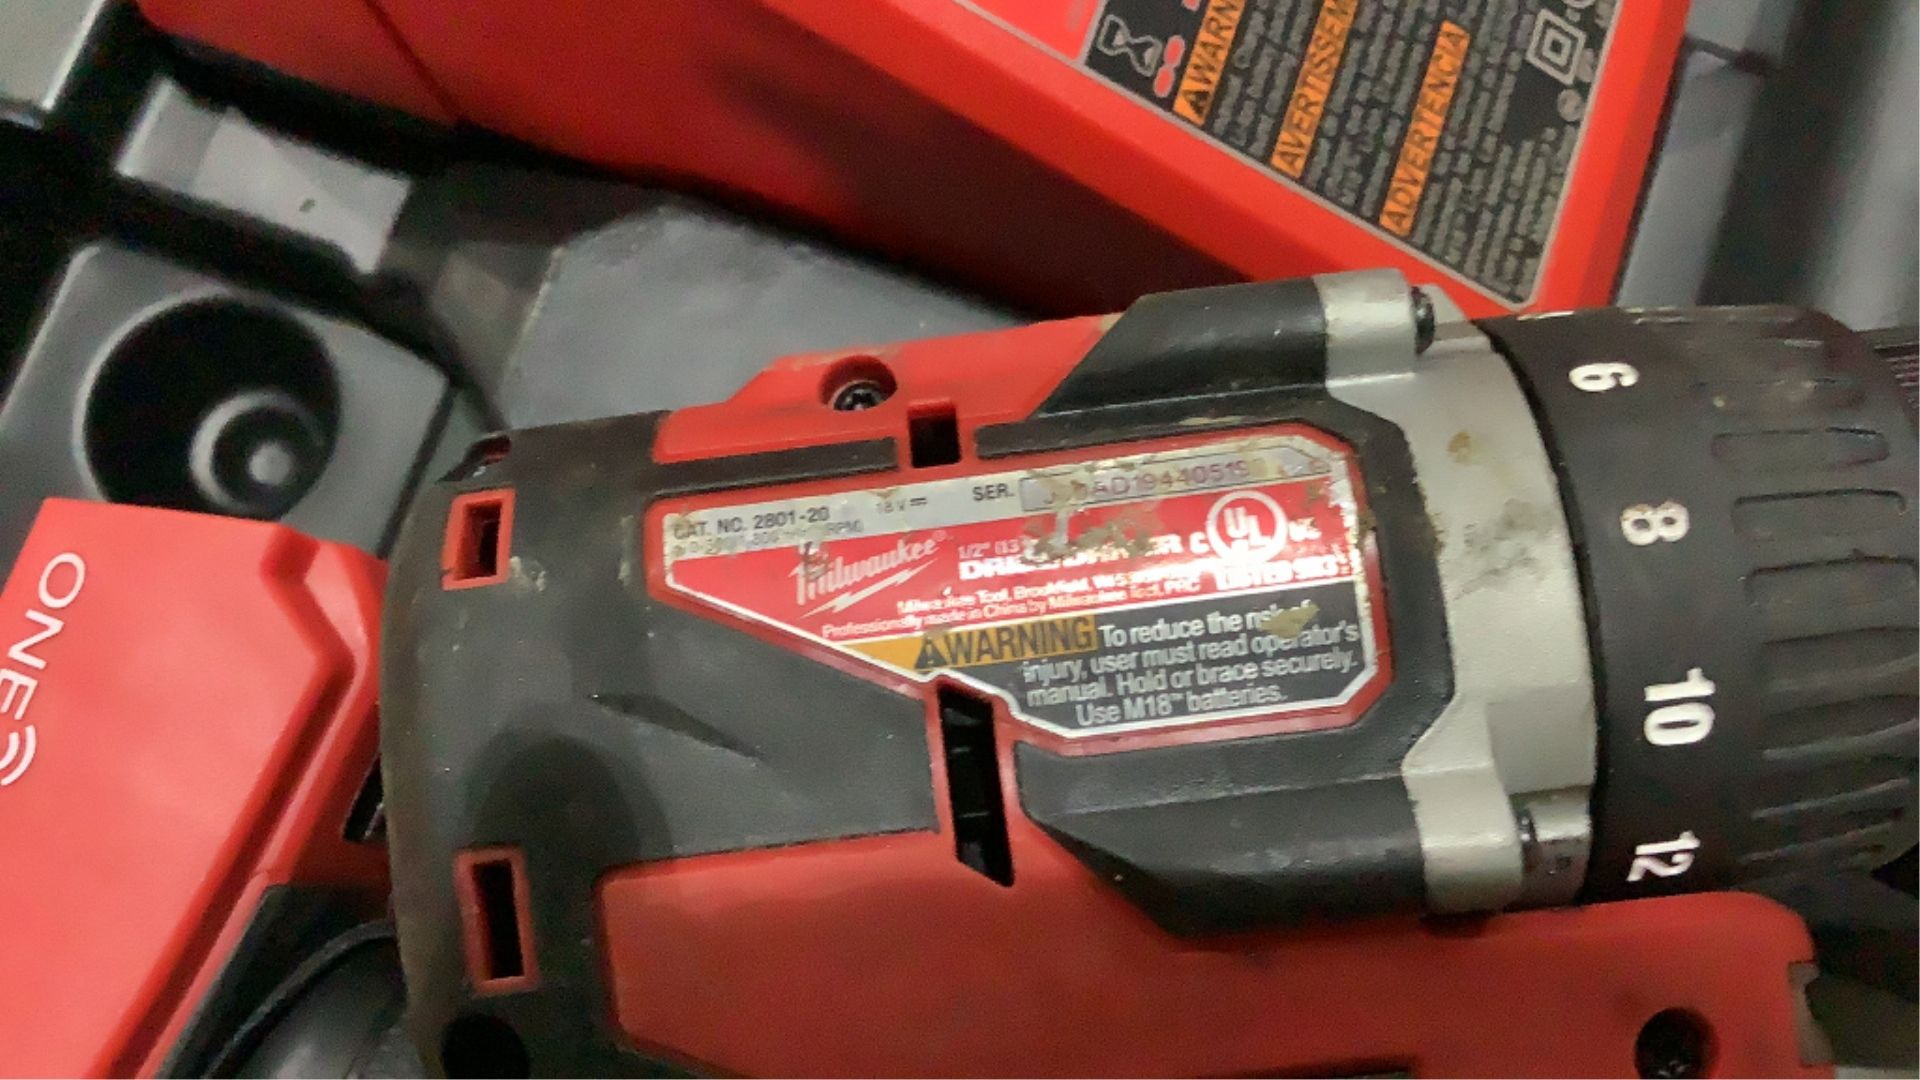 Milwaukee 1/4" Impact Driver and 1/2" Drill/Driver - Image 12 of 12